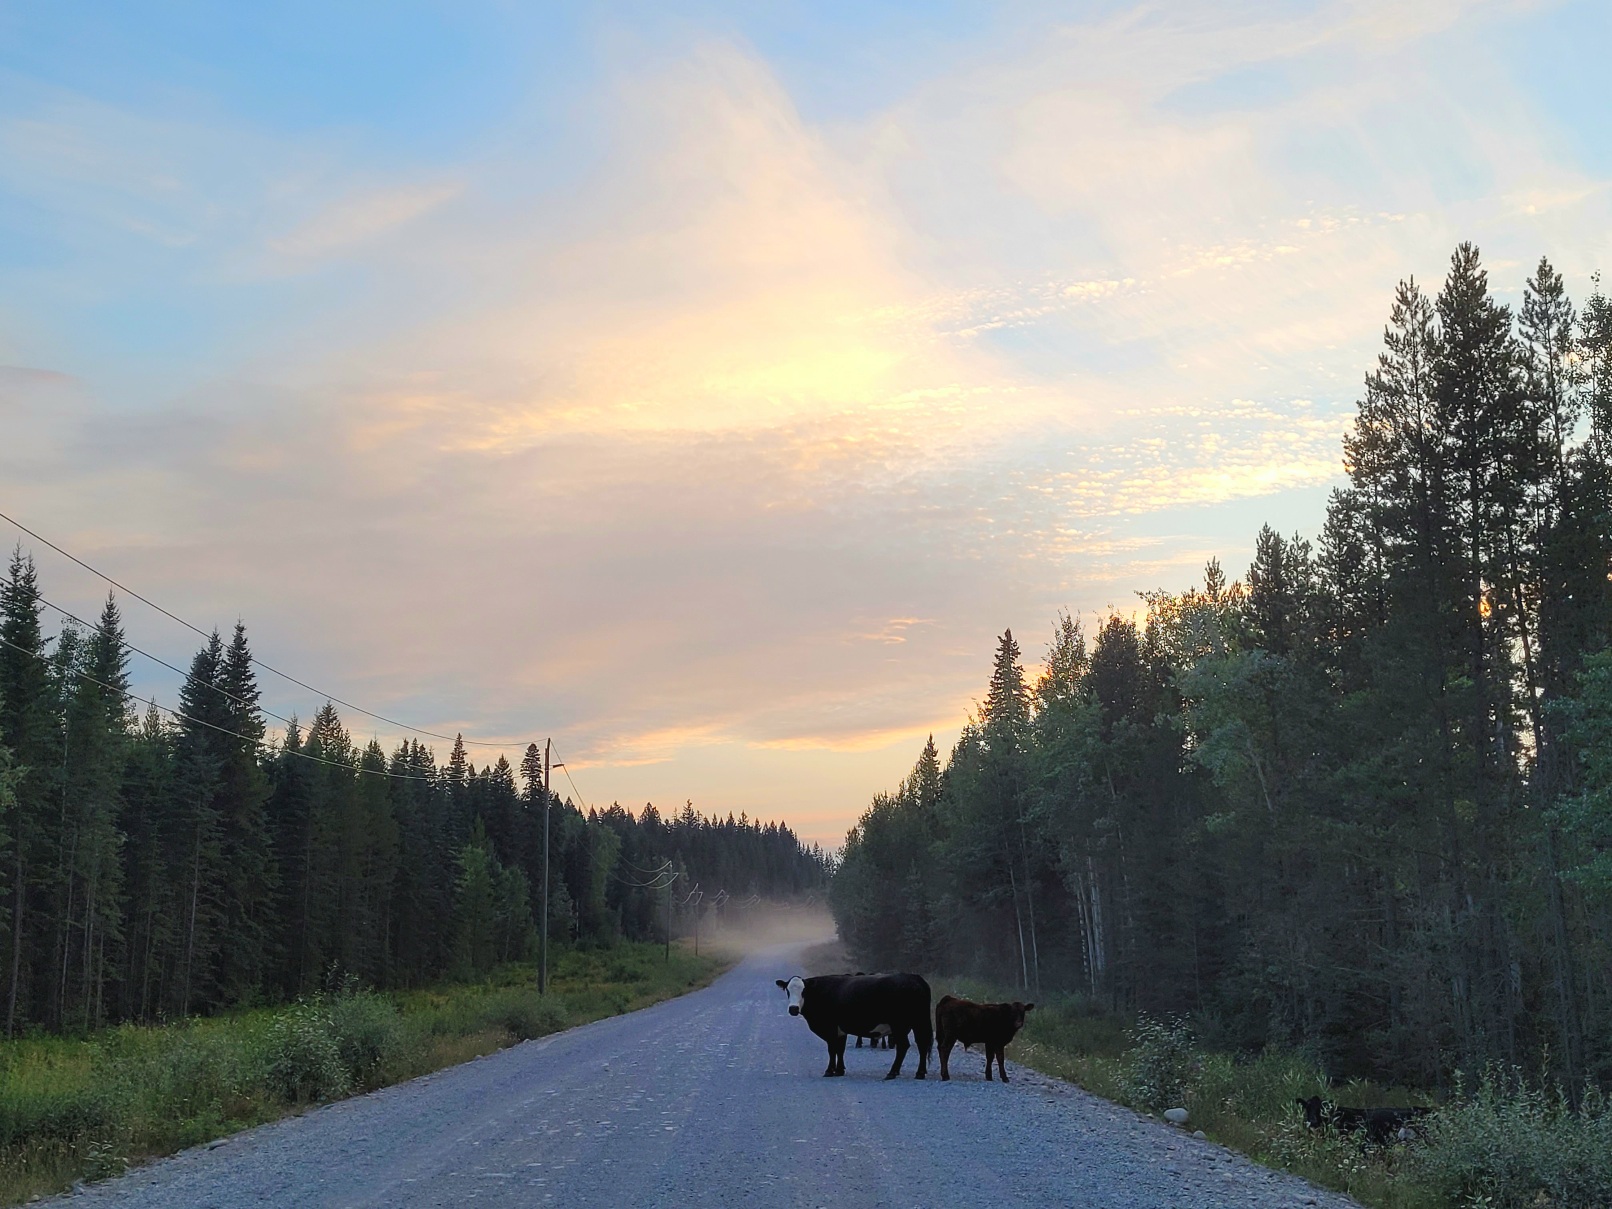 photo of free range cattle in a gravel road near sunset